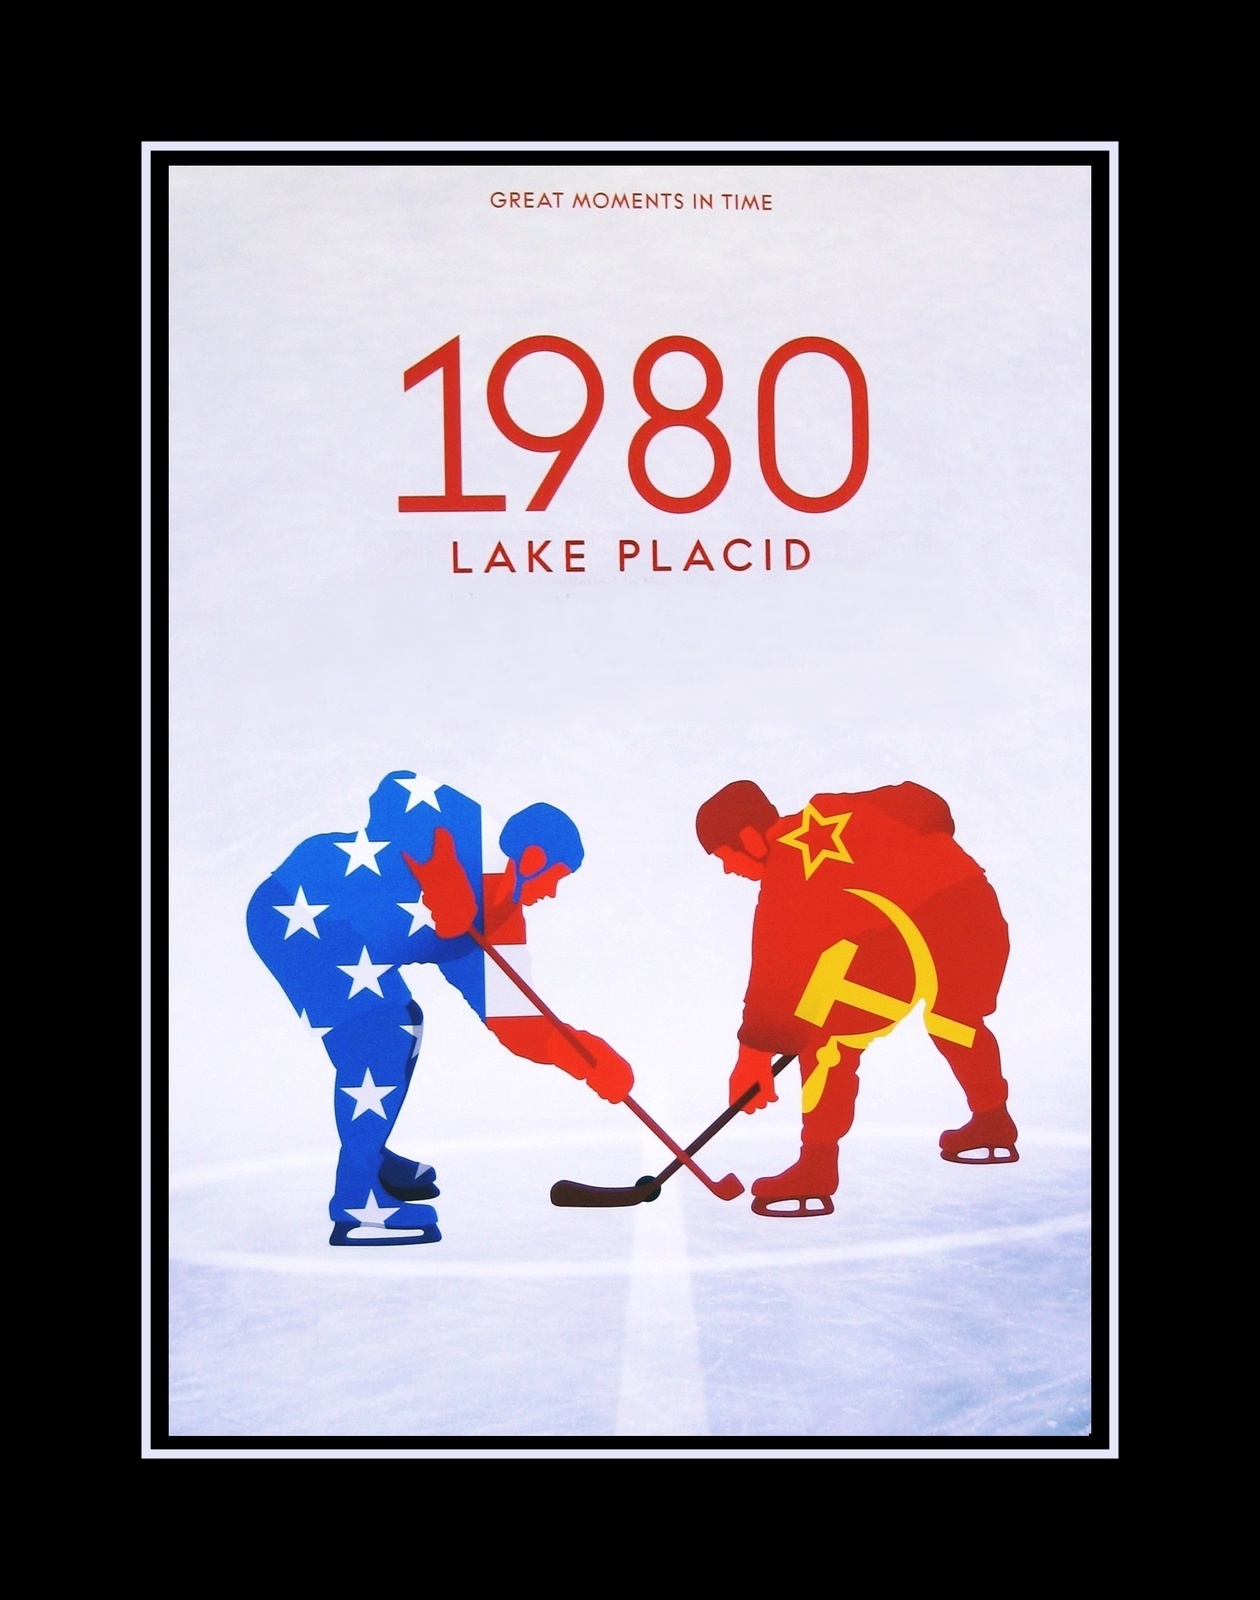 Rare 1980 USA Men's Olympic Hockey Poster Unique Gift - $19.99 - $39.99